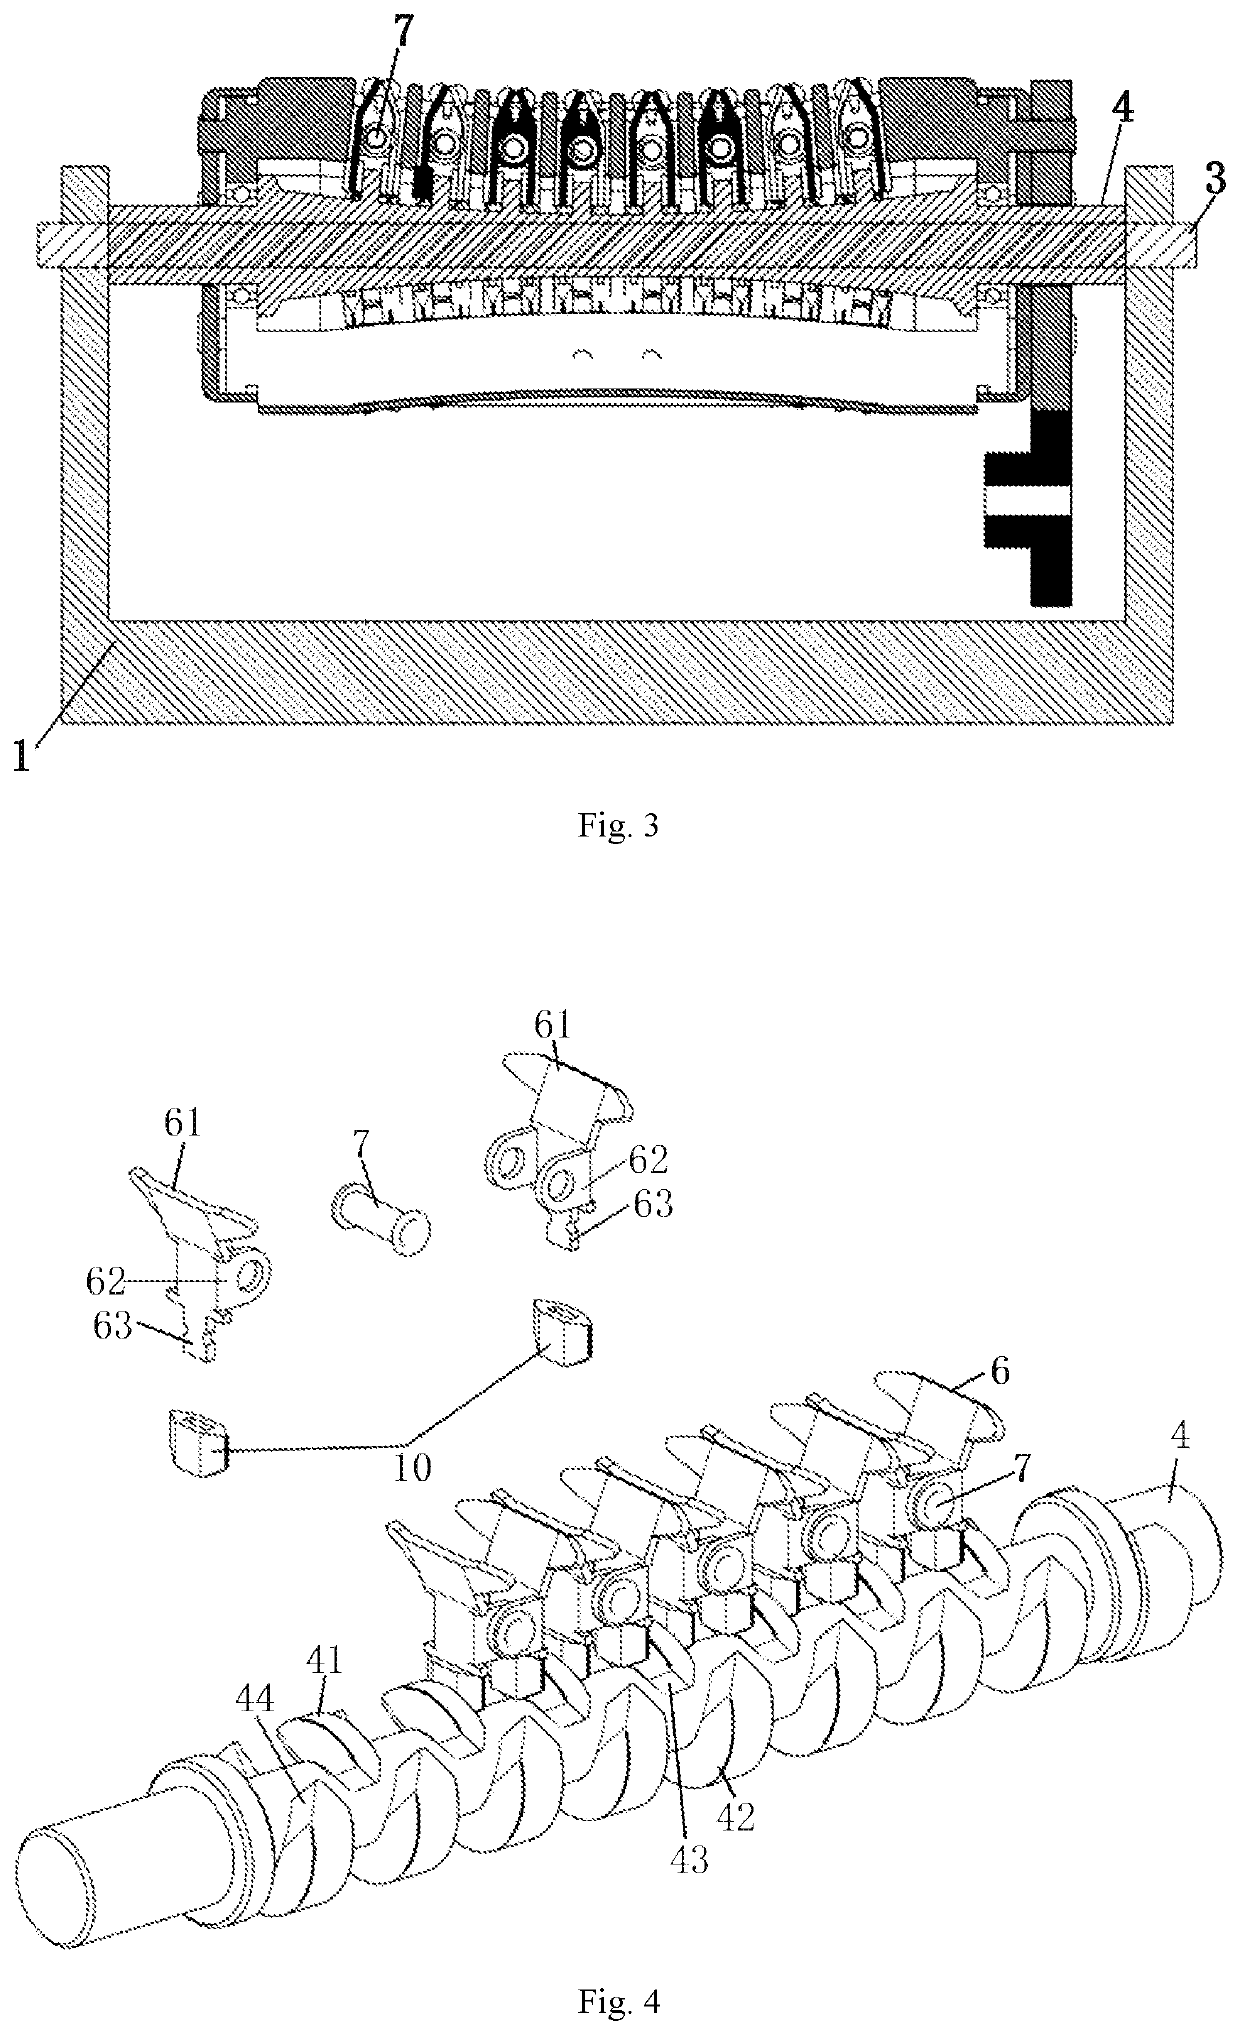 Hair pulling device